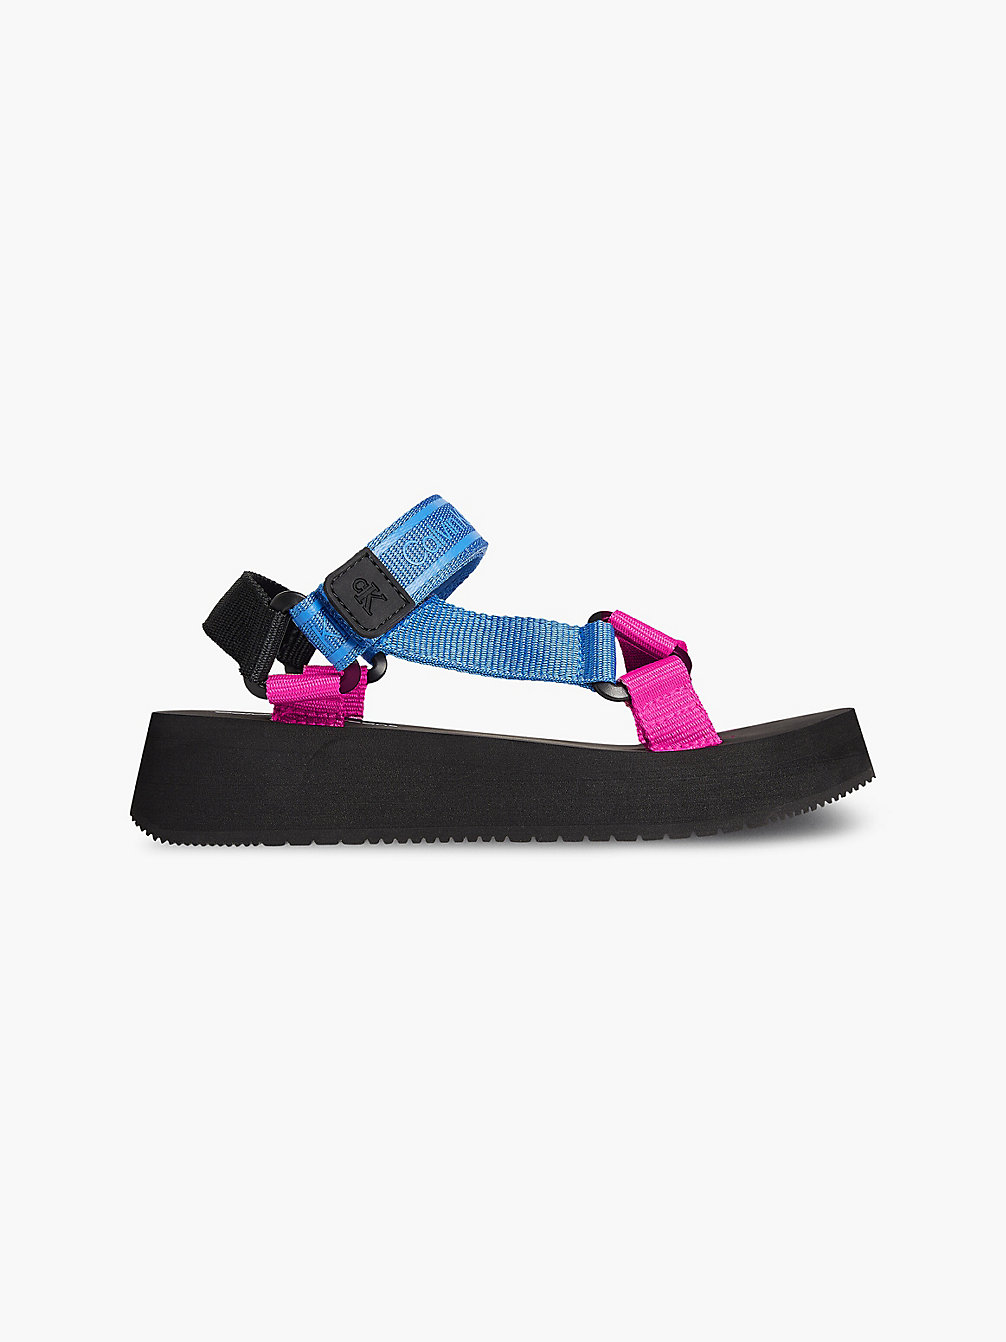 KNOCKOUT PINK/ BLUE Recycled Webbing Sandals undefined women Calvin Klein